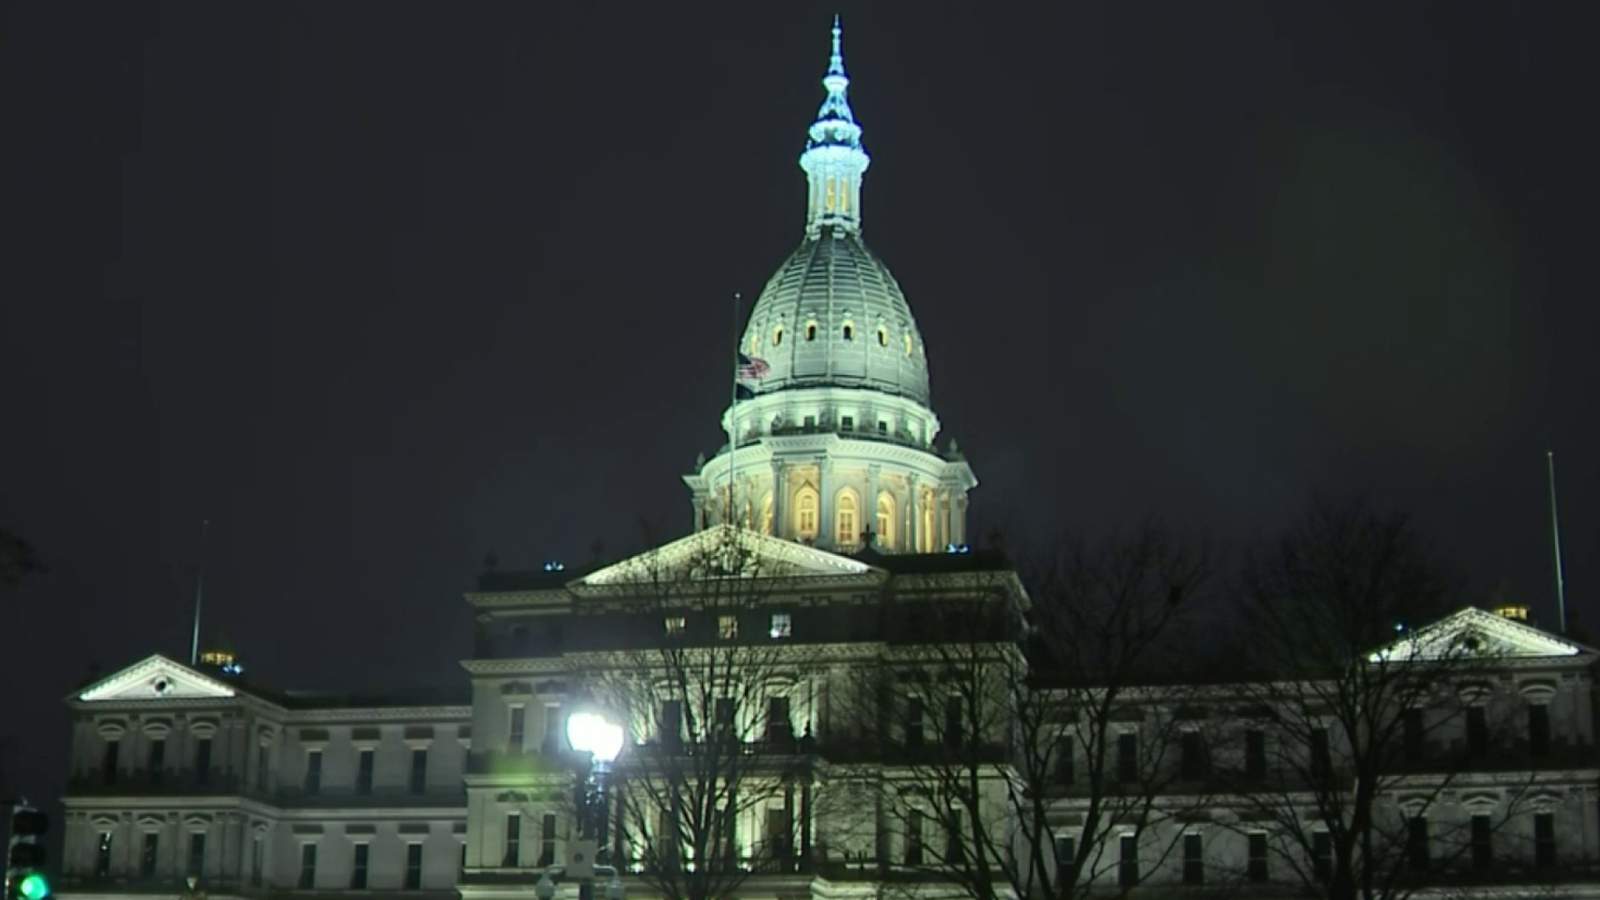 Morning Briefing Jan. 16, 2021: Michigan Capitol on alert ahead of expected protest, counties cancel appointments due to COVID vaccine shortage, FCA and Peugeot merge